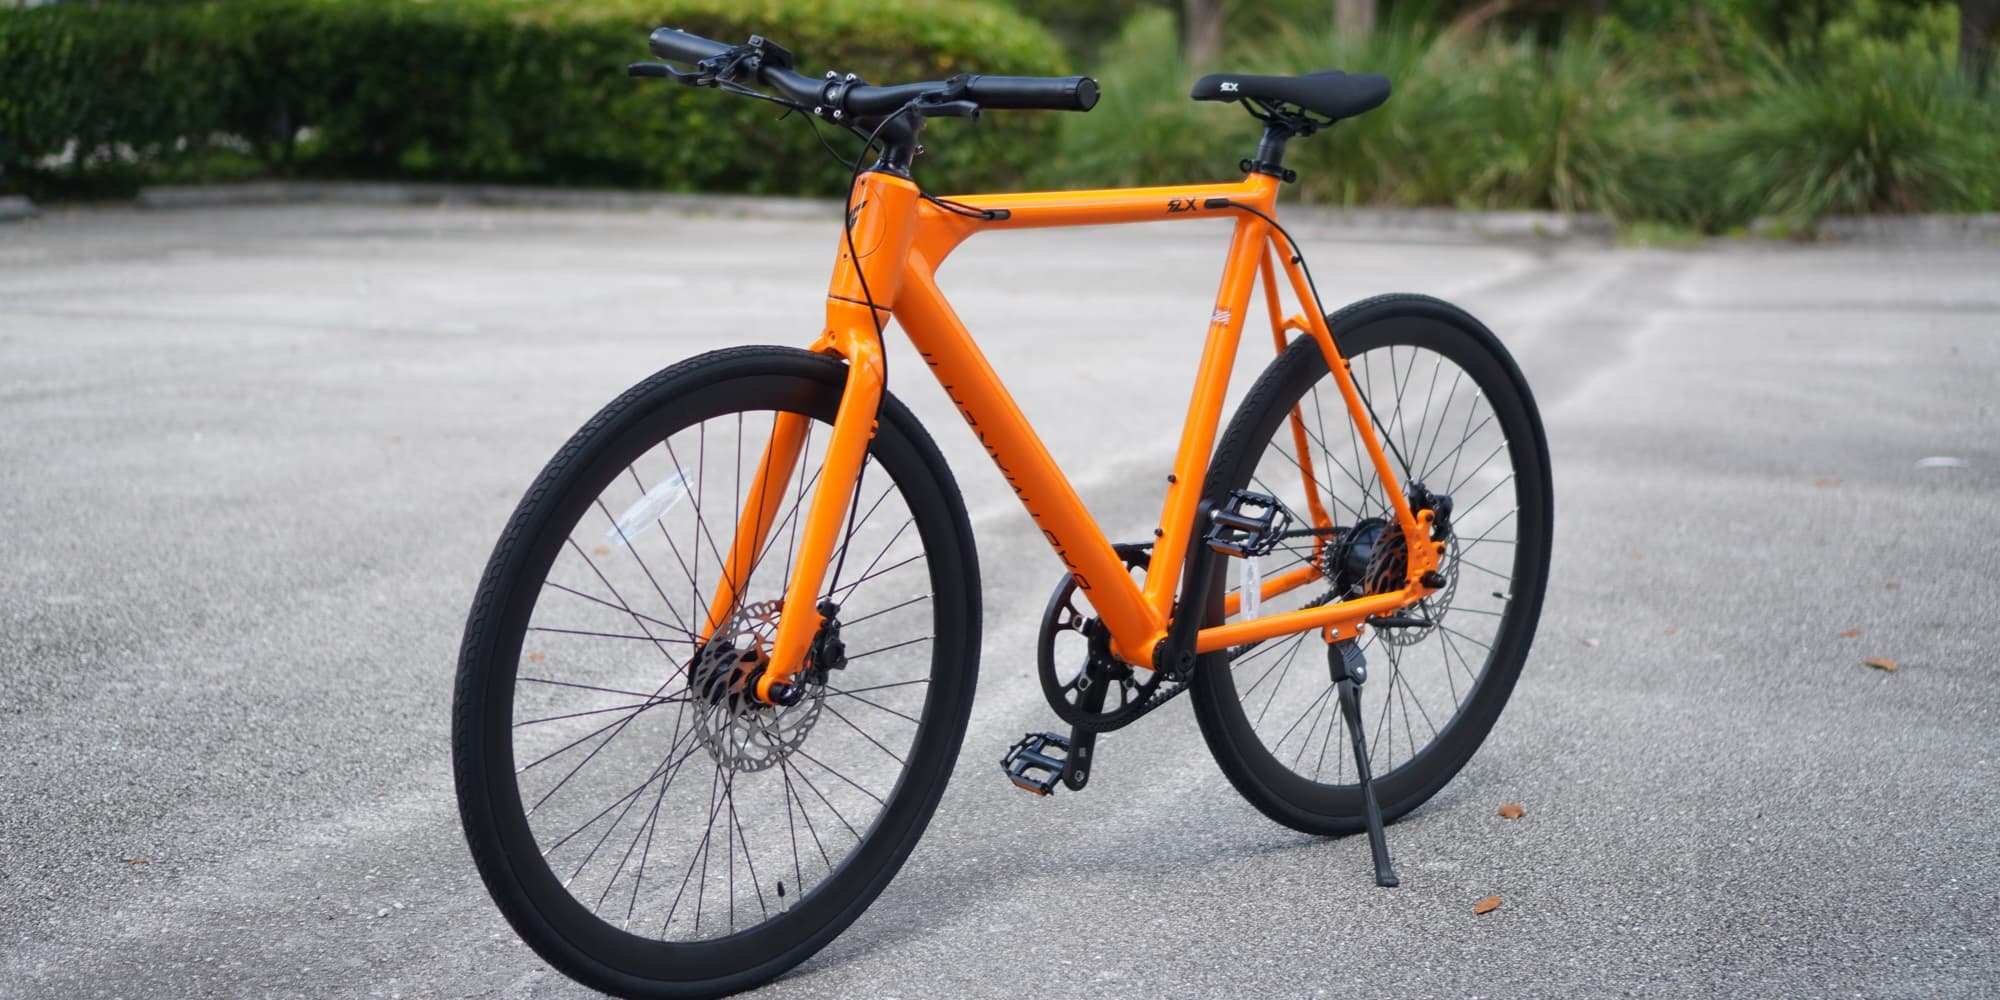 Babymaker 2 electric bike review: Edgy name, yet awesome e-bike